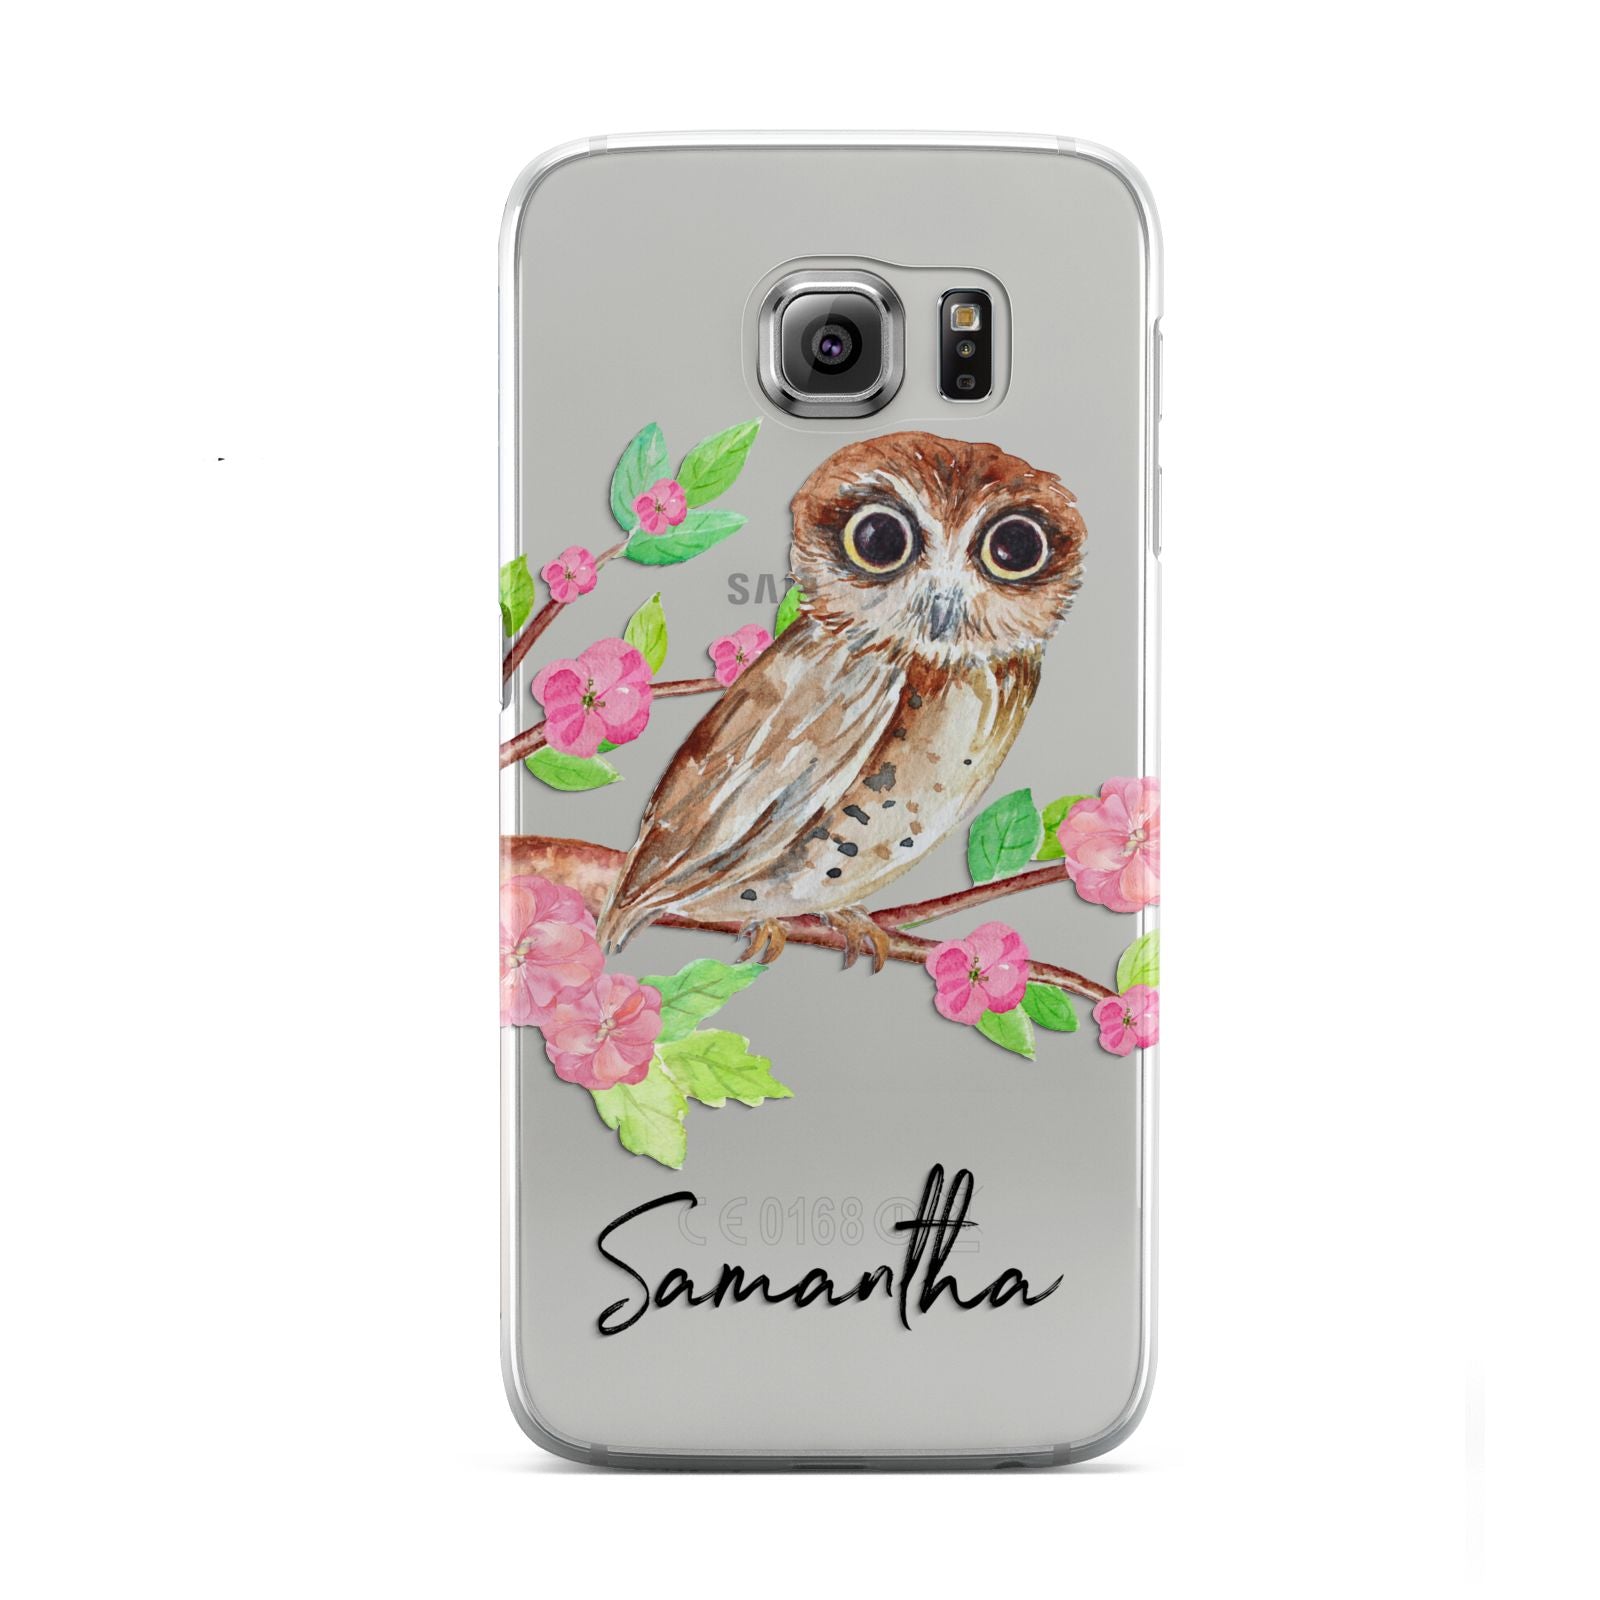 Personalised Owl Samsung Galaxy S6 Case